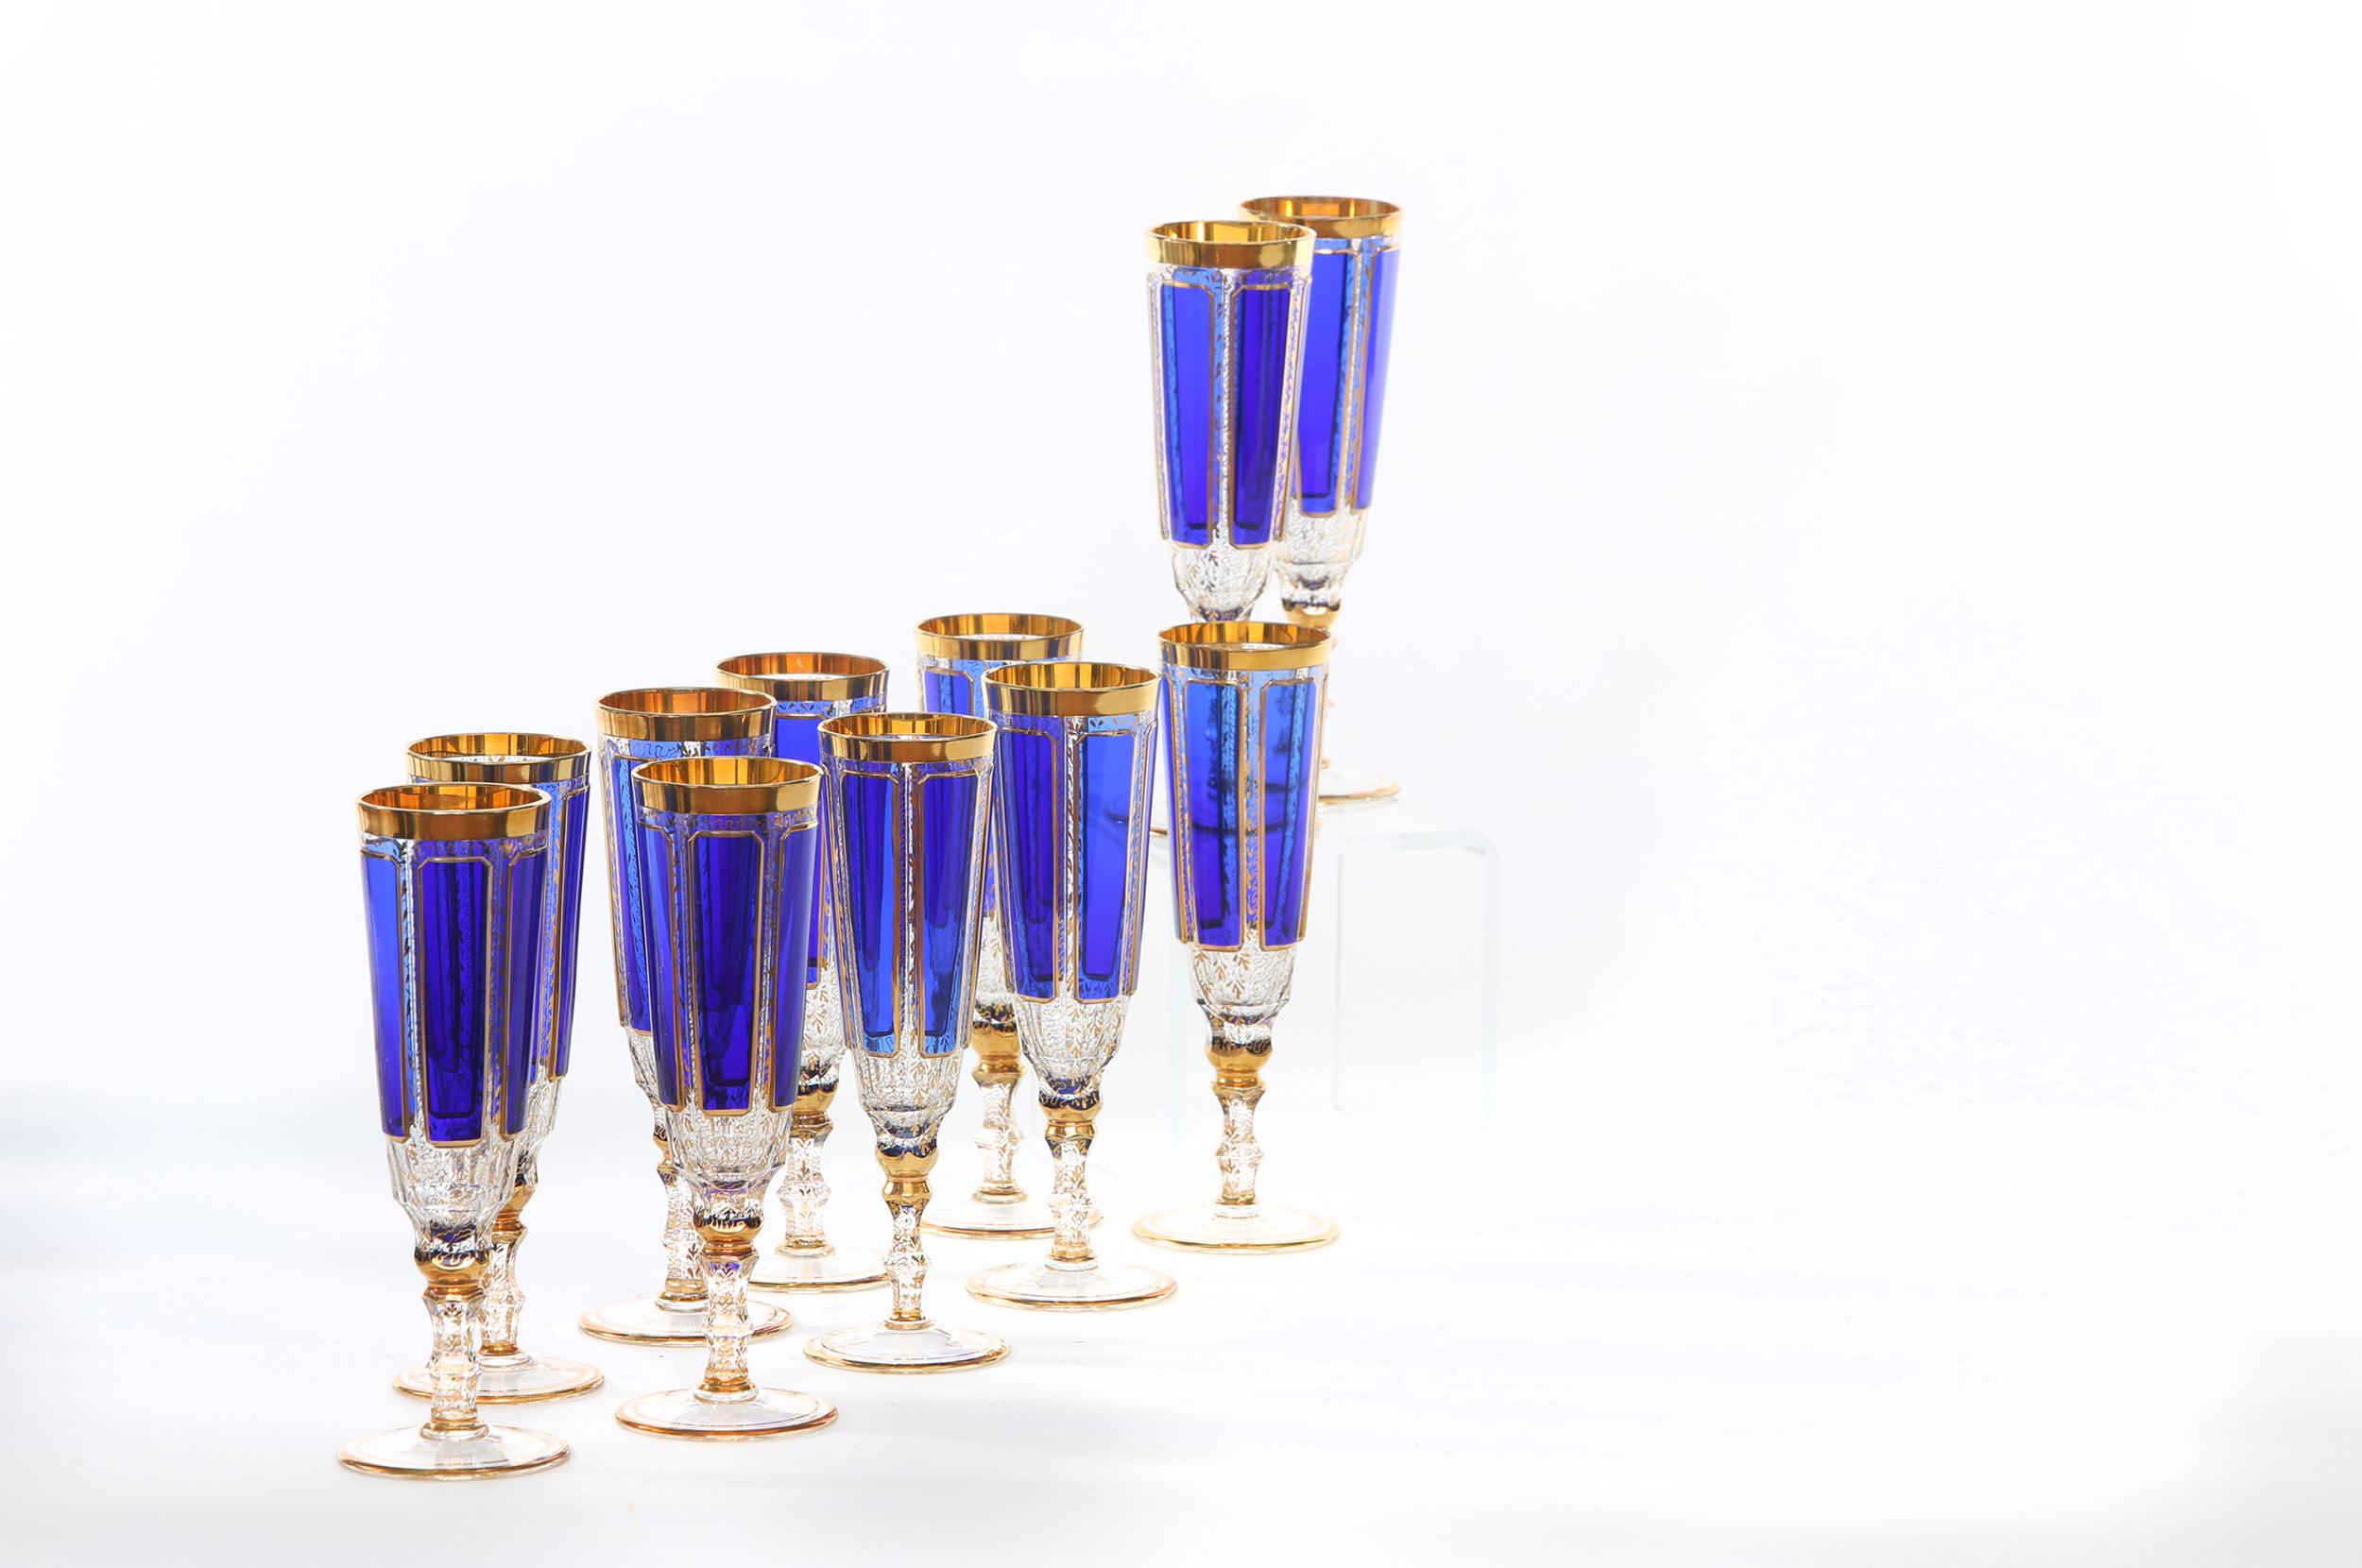 Moser crystal Barware / tableware Bohemian hand blown panel cut cobalt blue with gold design details champagne flutes glassware service for eleven people. Each glass is in great vintage condition. Minor wear consistent with age / use. Each glass